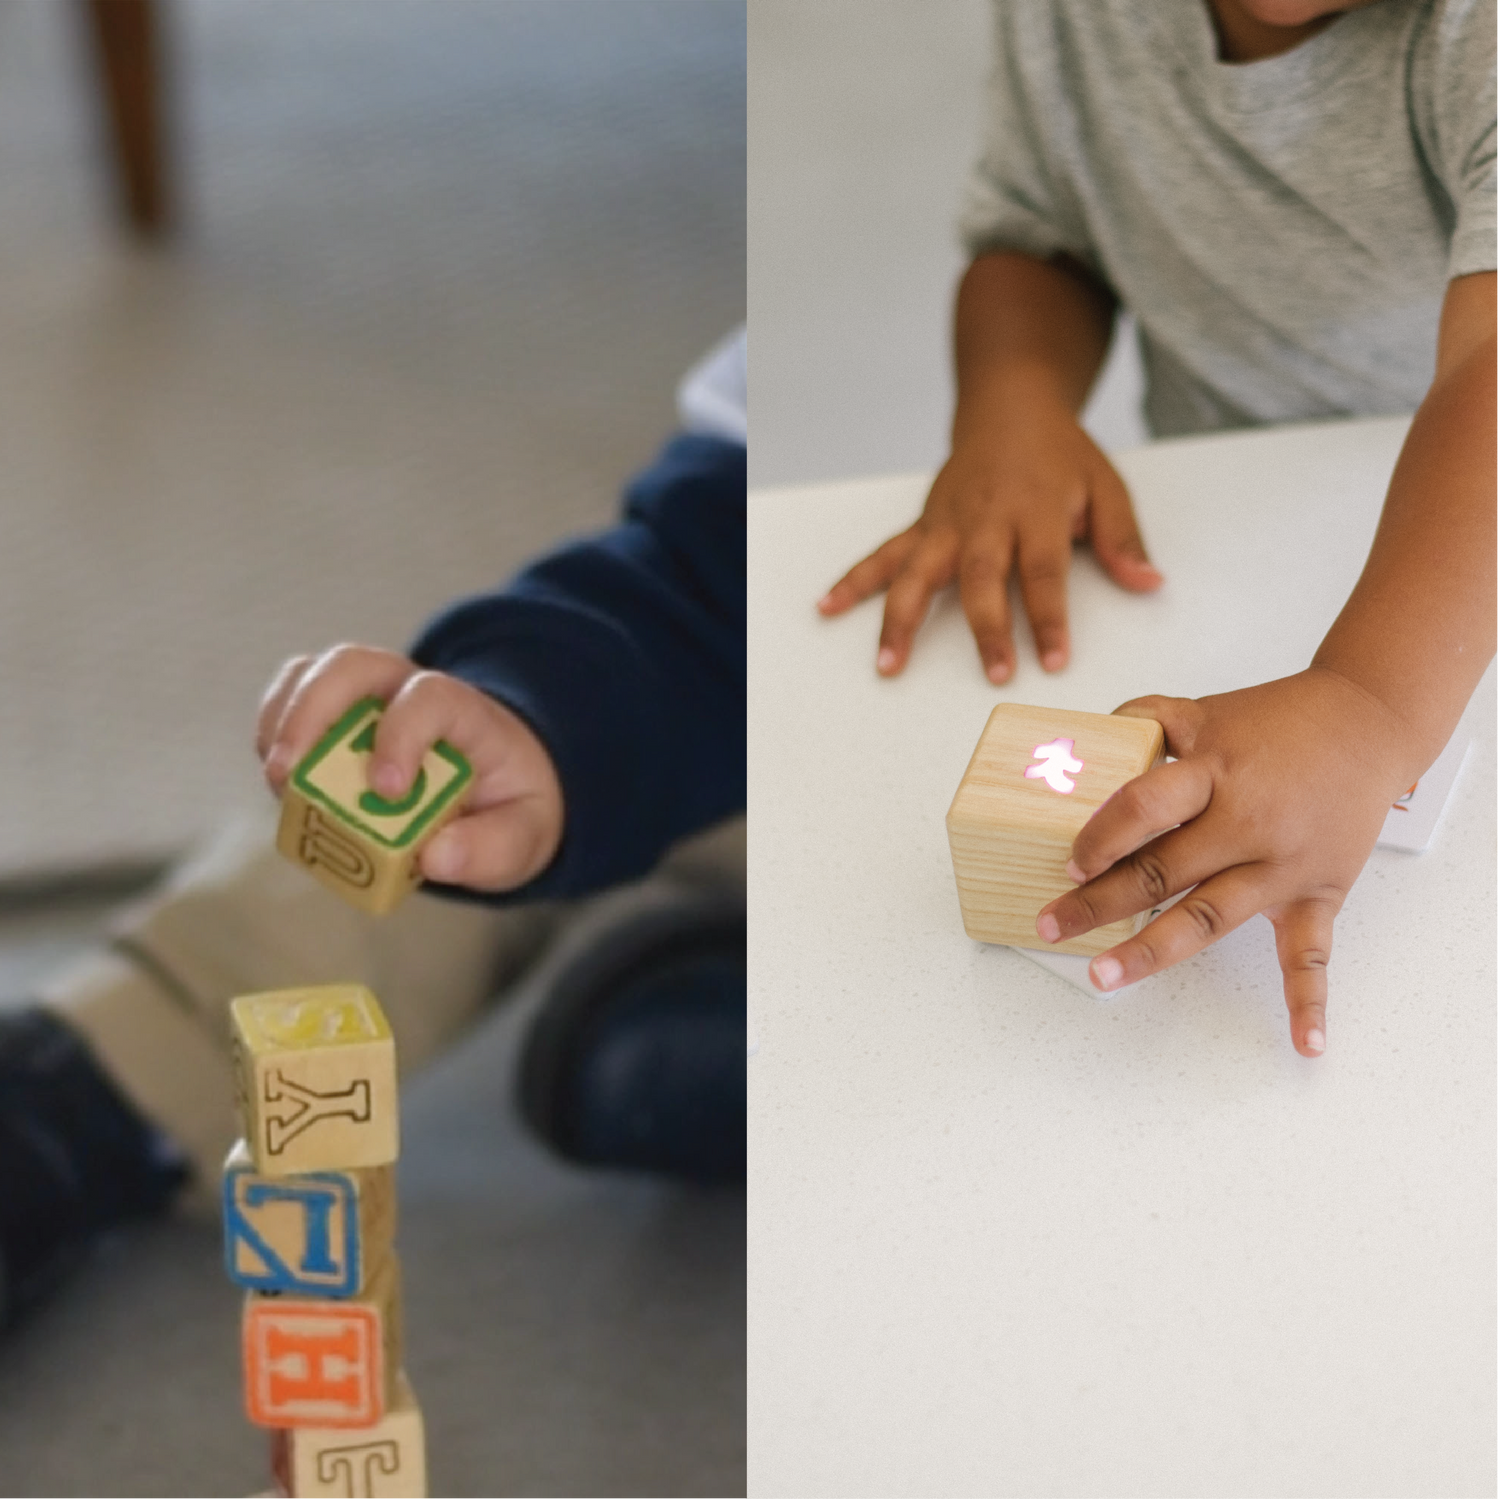 Side by side images showing hands and forearms of toddles playing with wooden blocks and the Kiri Smart Block